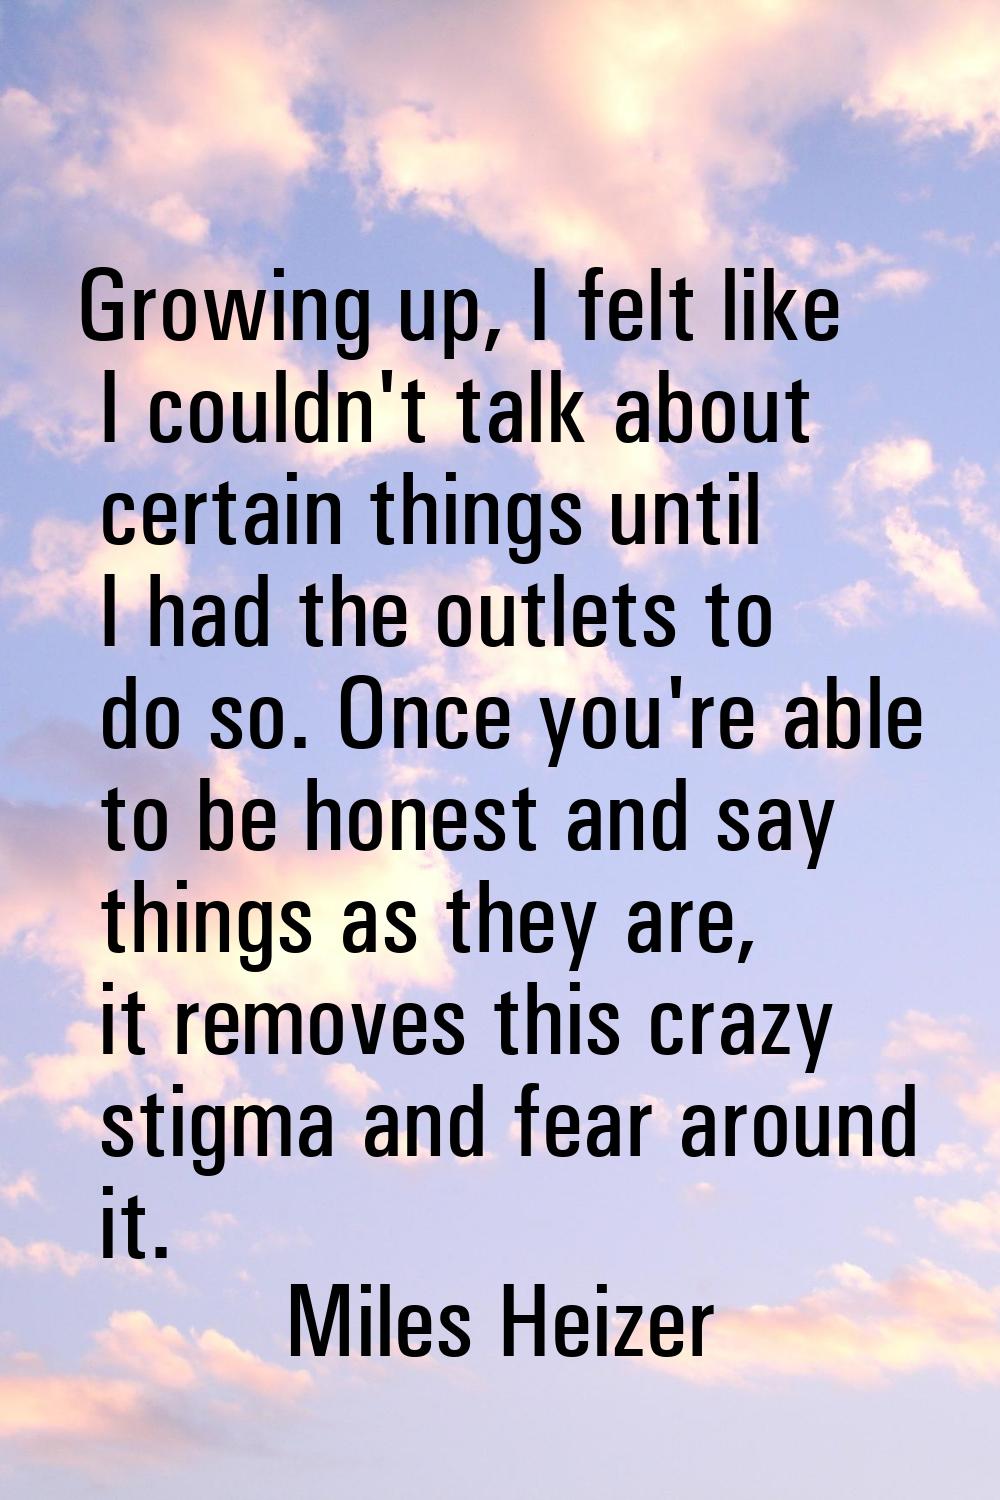 Growing up, I felt like I couldn't talk about certain things until I had the outlets to do so. Once